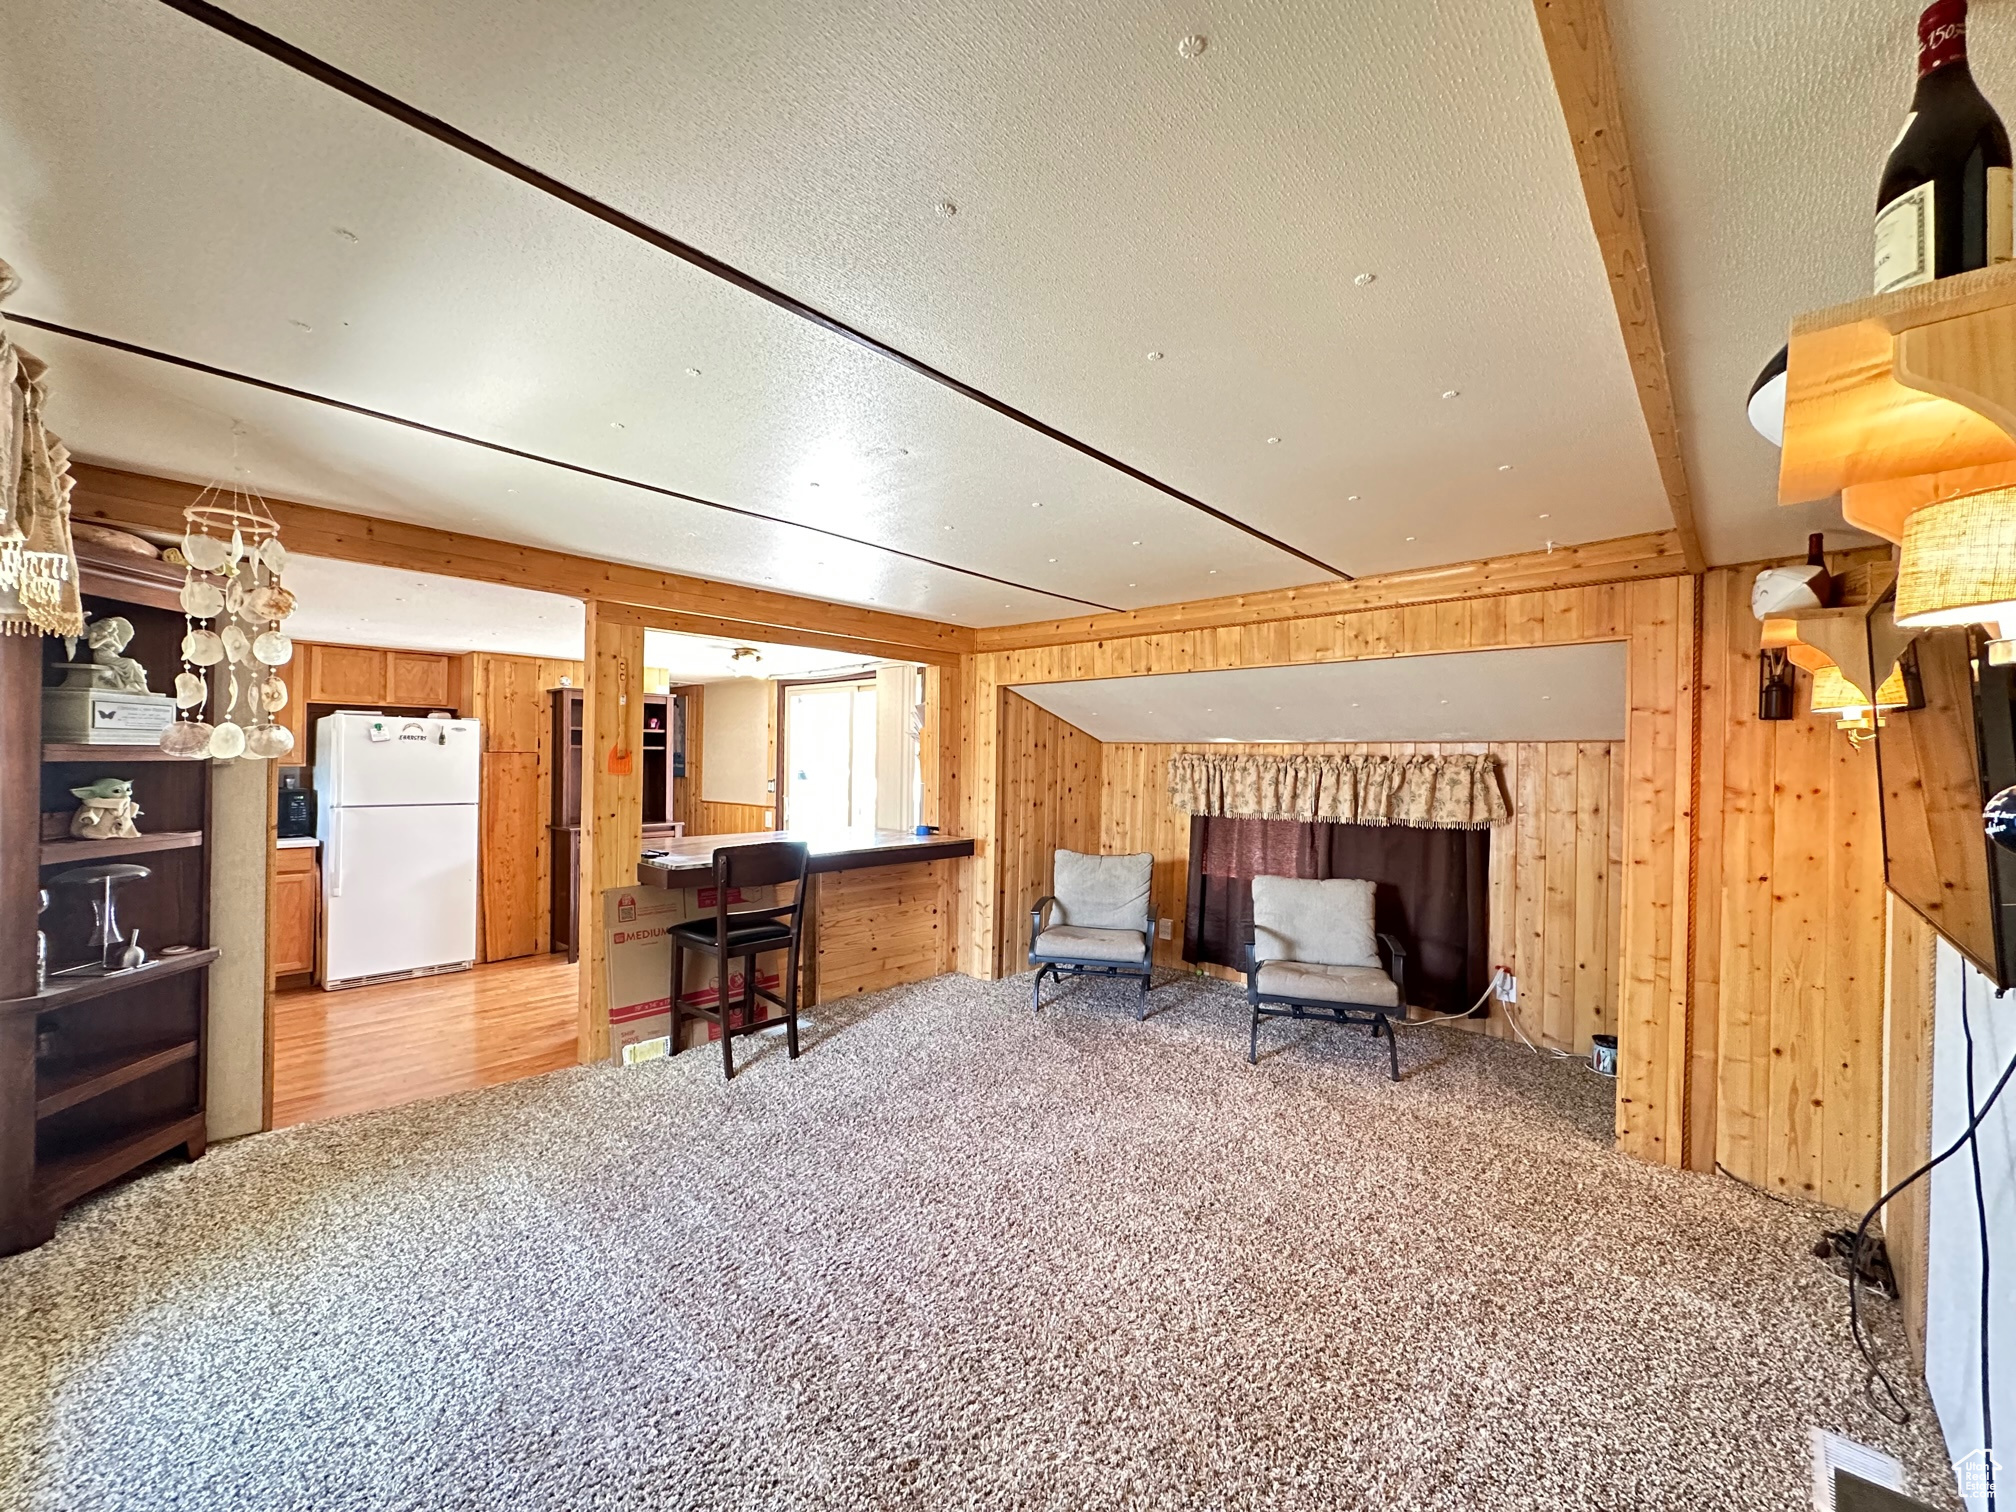 Interior space featuring wooden walls, beam ceiling, light colored carpet, open to kitchen